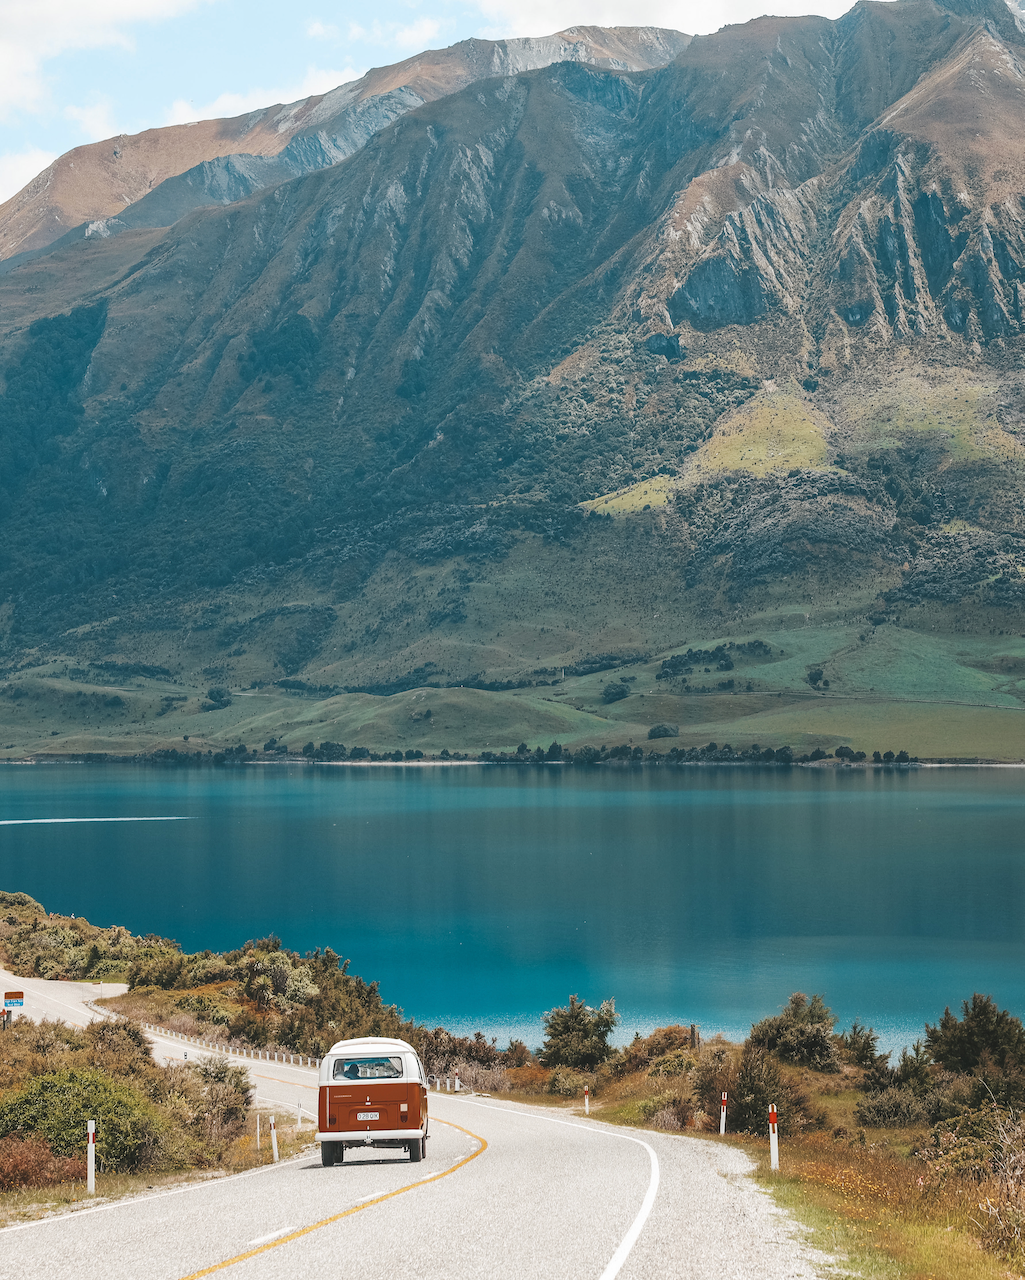 Iconic old campervan driving down the road near the Neck - Lake Hawea - New Zealand